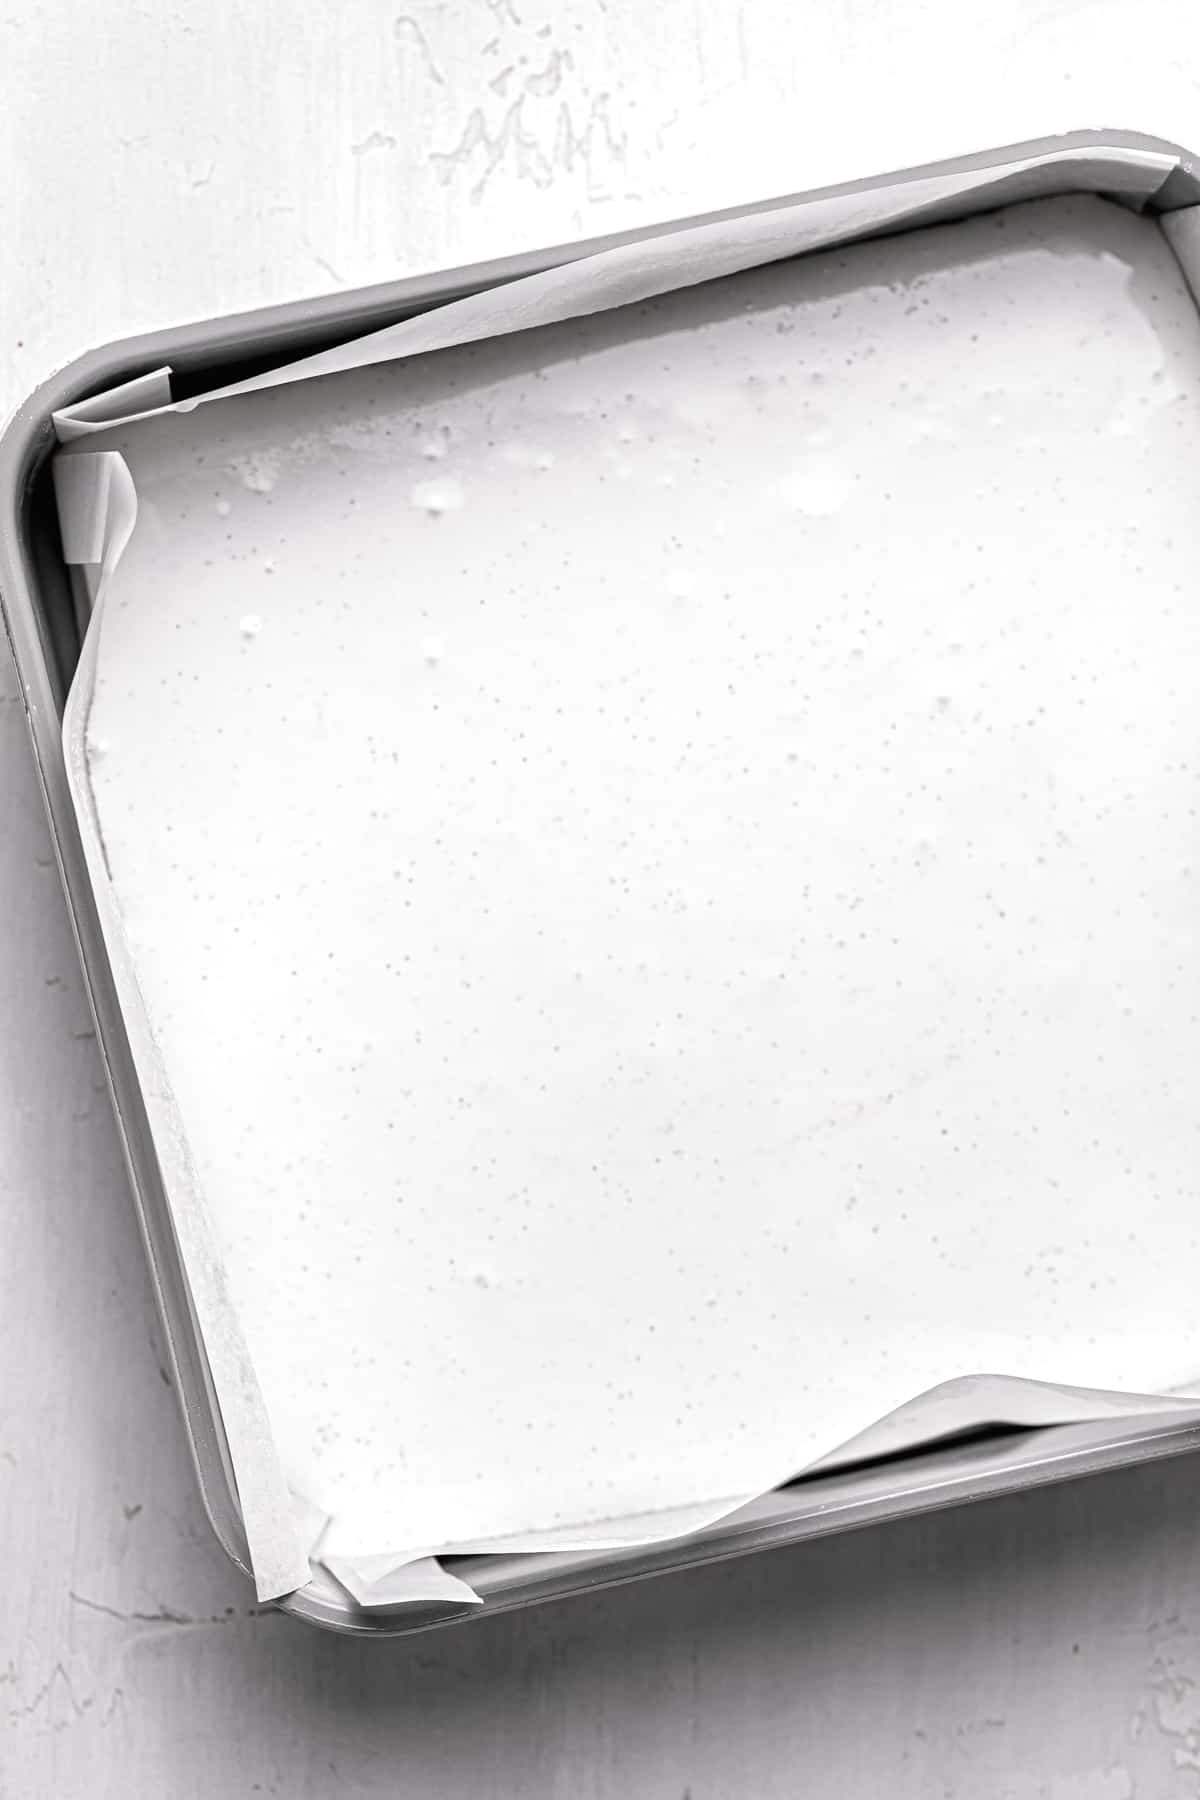 marshmallow mixture in square pan